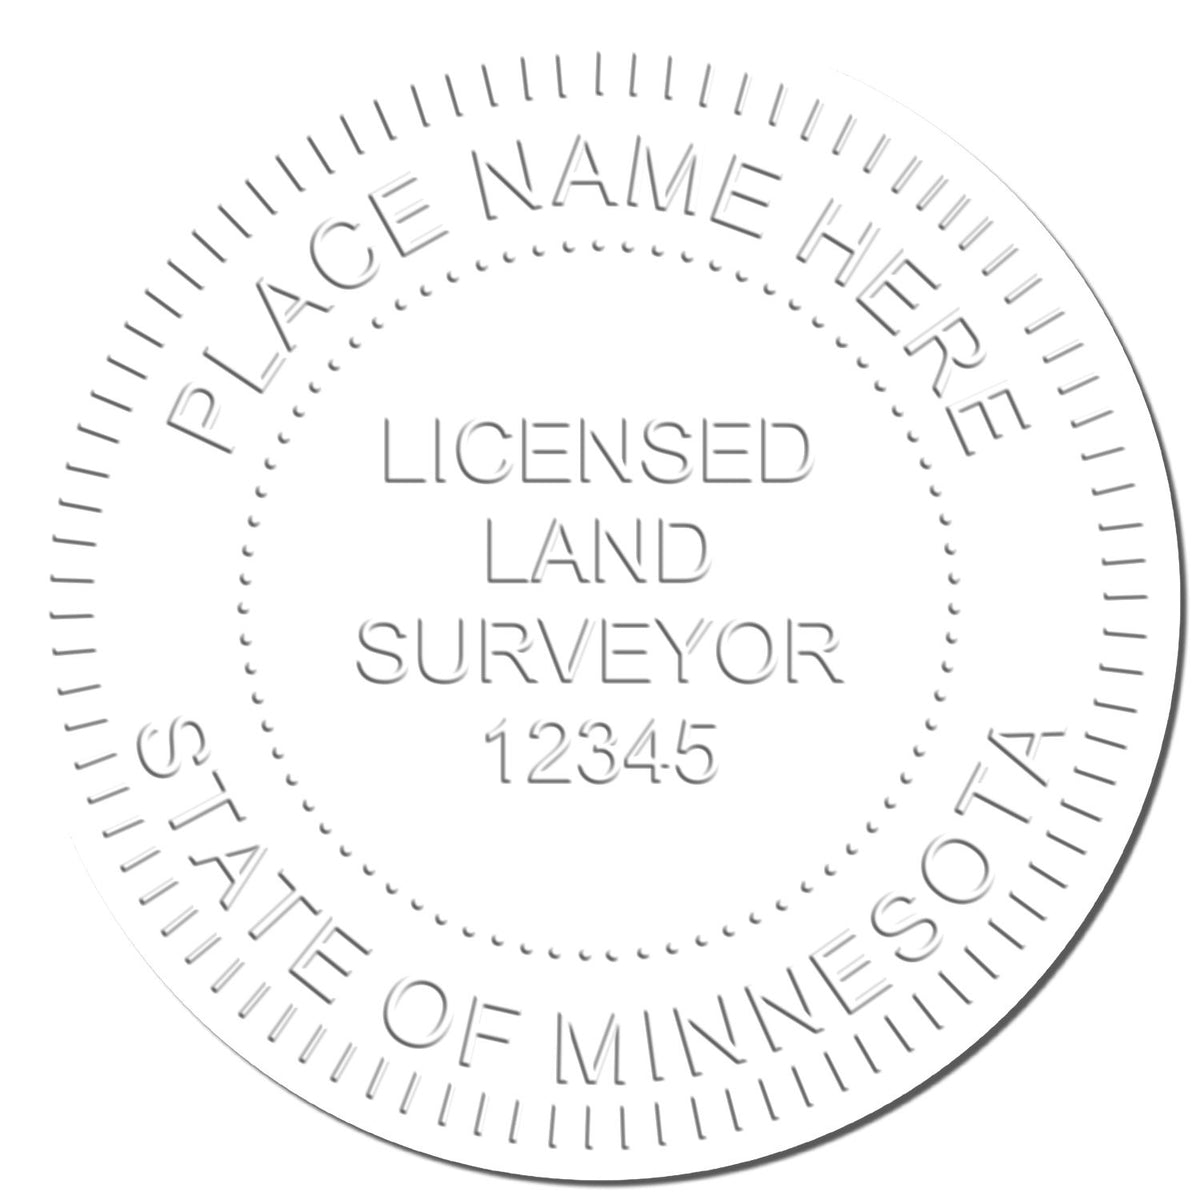 This paper is stamped with a sample imprint of the Long Reach Minnesota Land Surveyor Seal, signifying its quality and reliability.